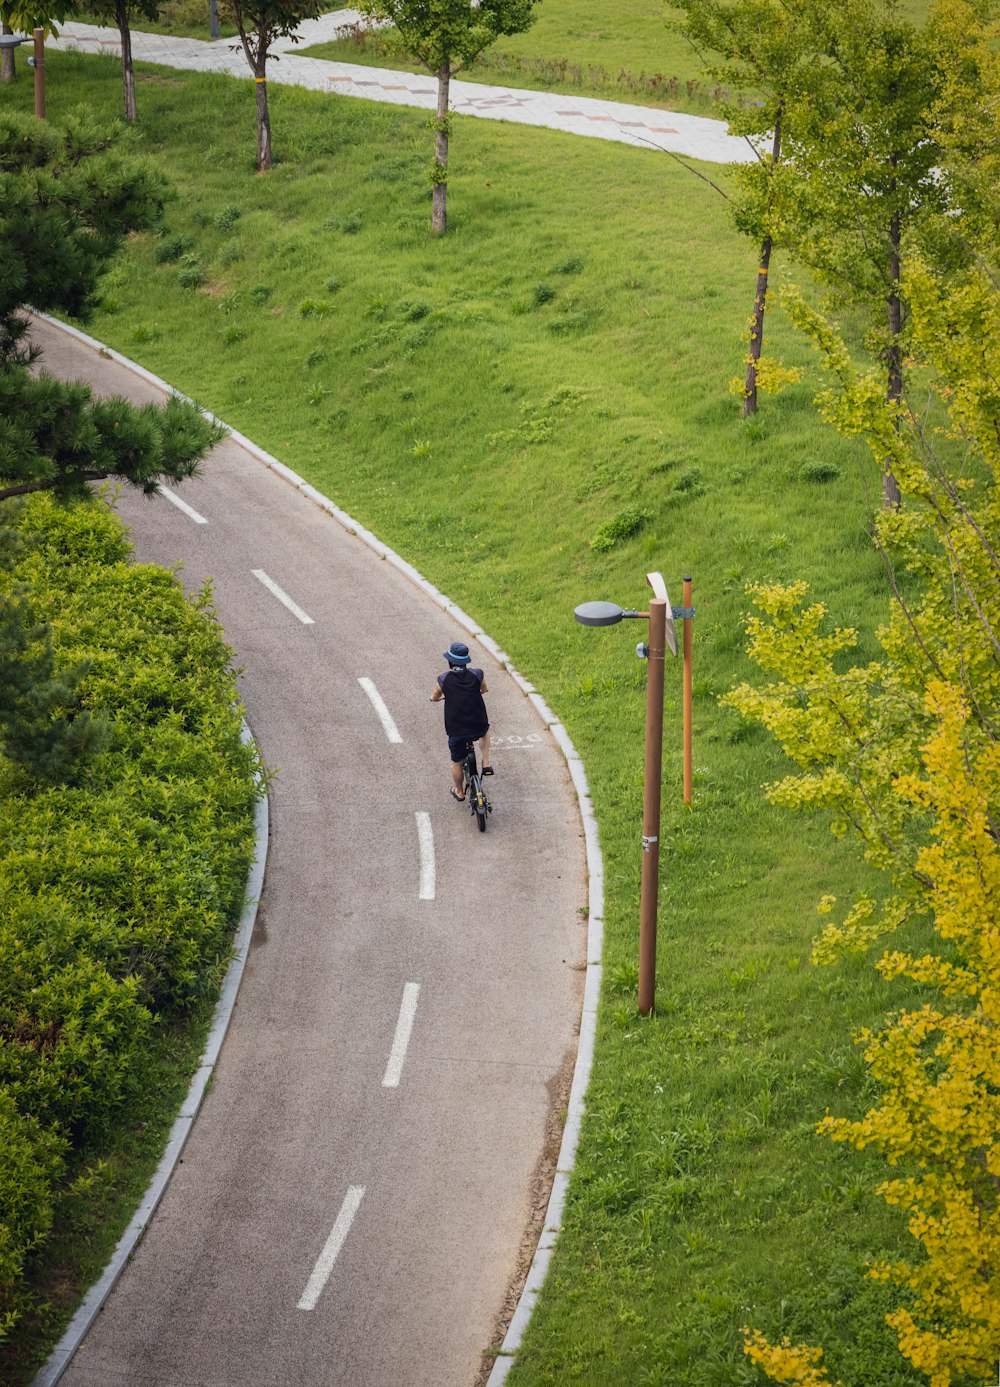 a person riding a bicycle on a road